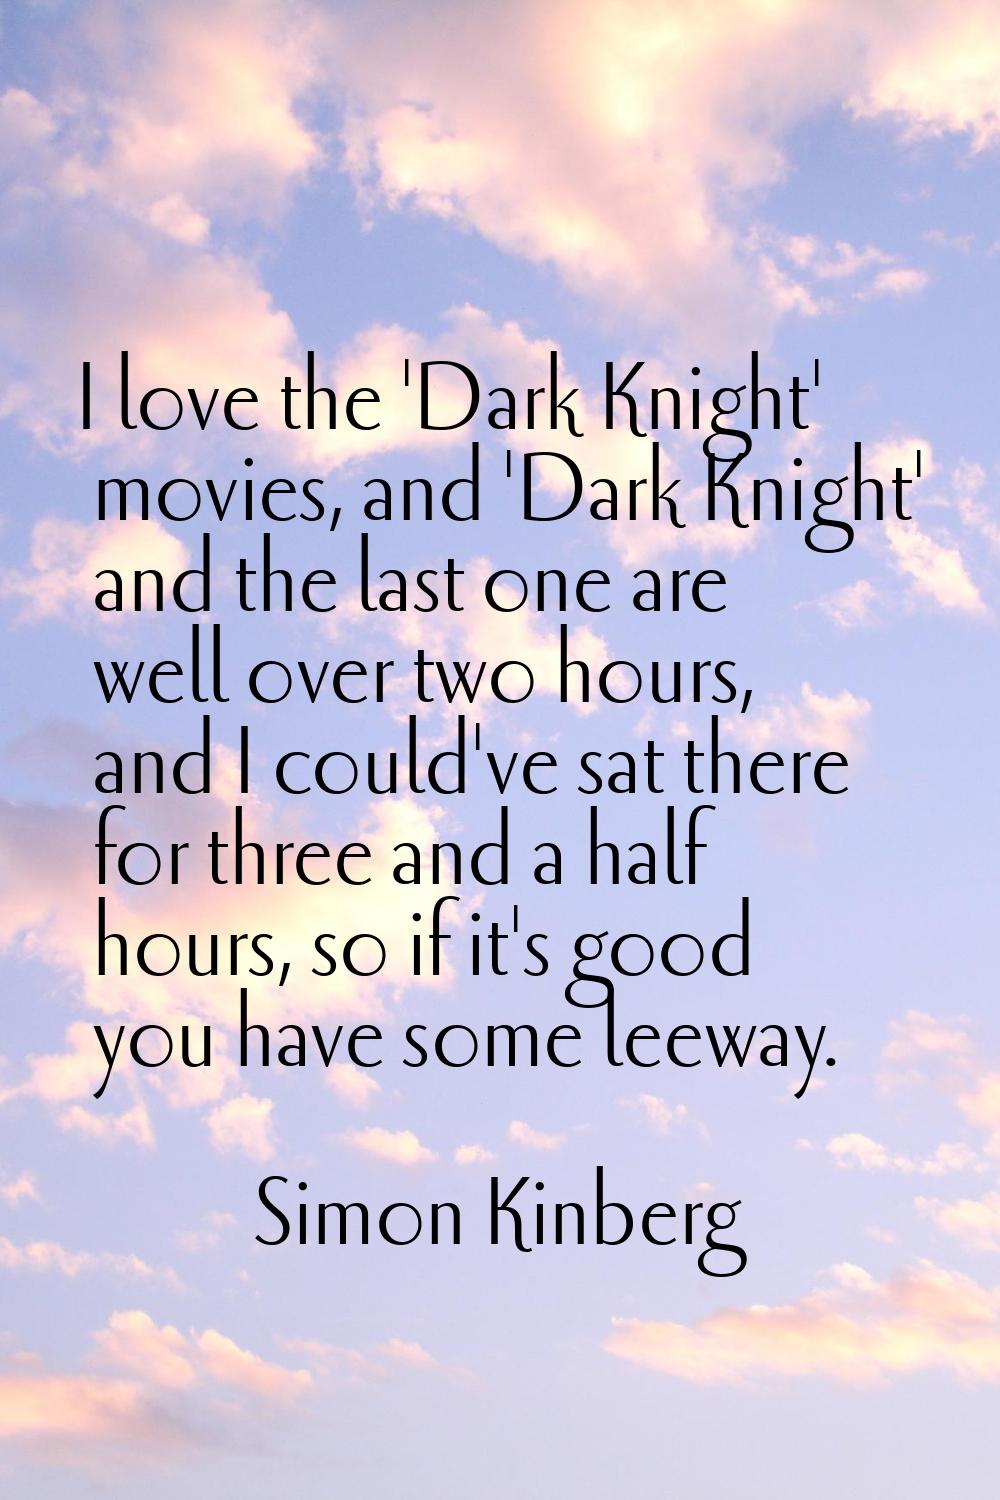 I love the 'Dark Knight' movies, and 'Dark Knight' and the last one are well over two hours, and I 